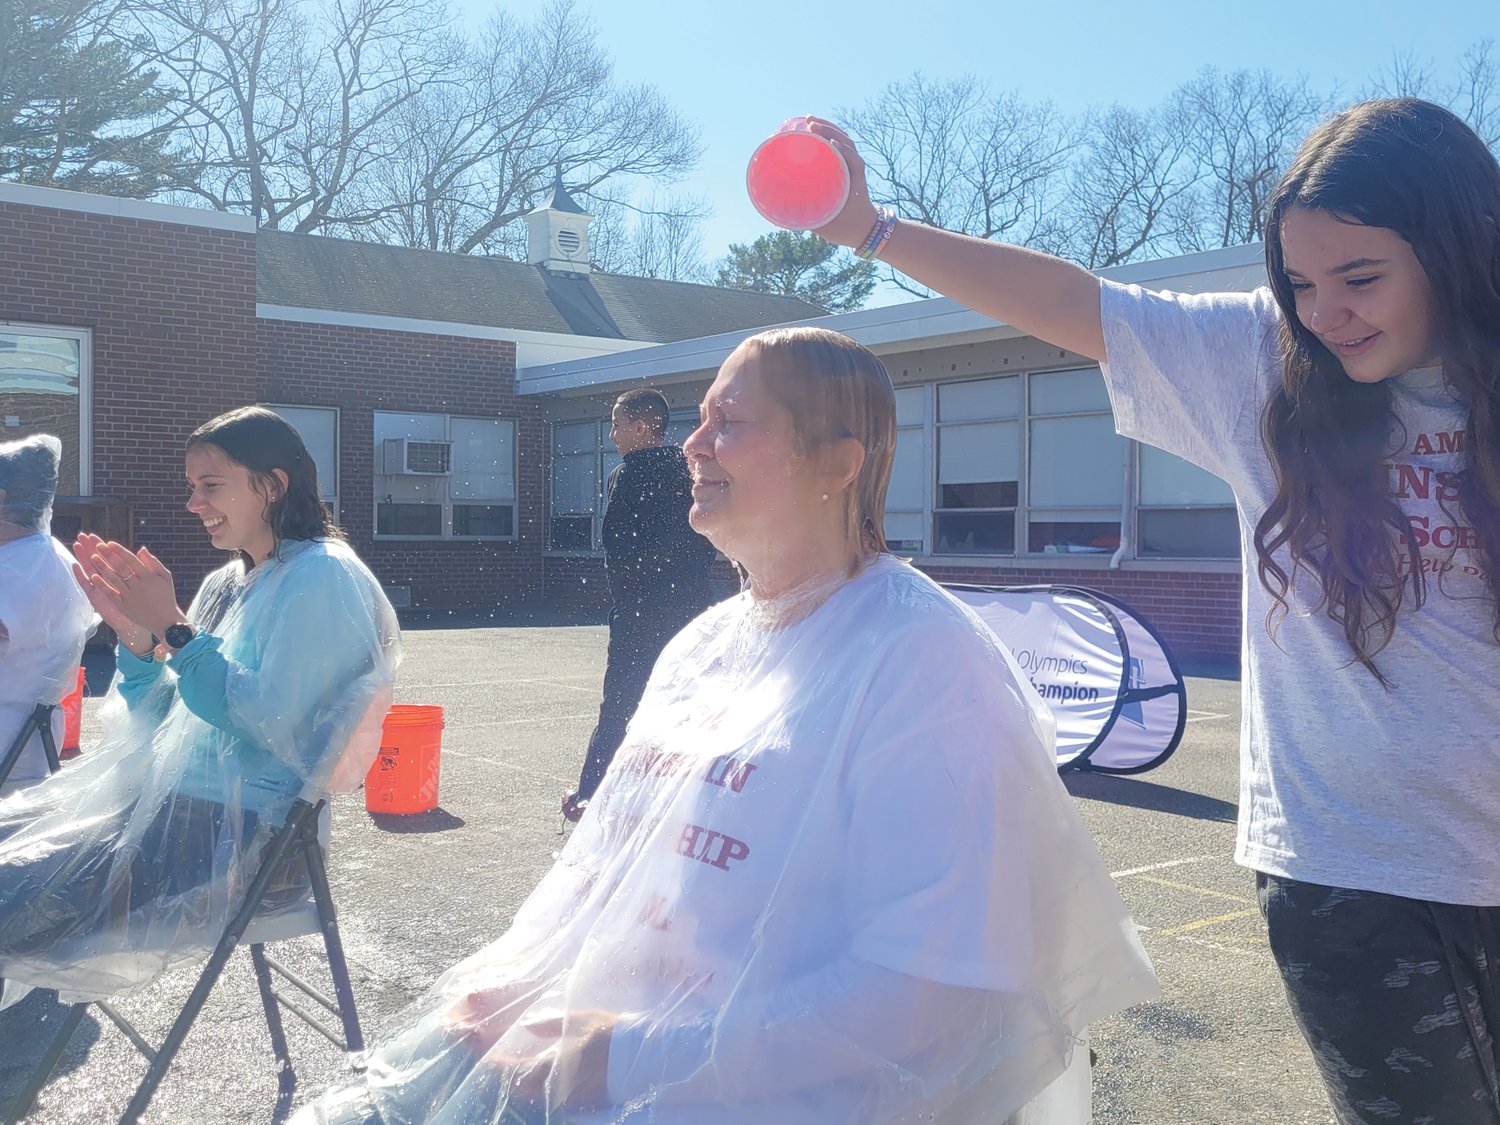 BROWN AVE. POUR: Students lined up to soak school staff members one cup, pitcher and bucket at a time, to raise money for Special Olympics Rhode Island. 